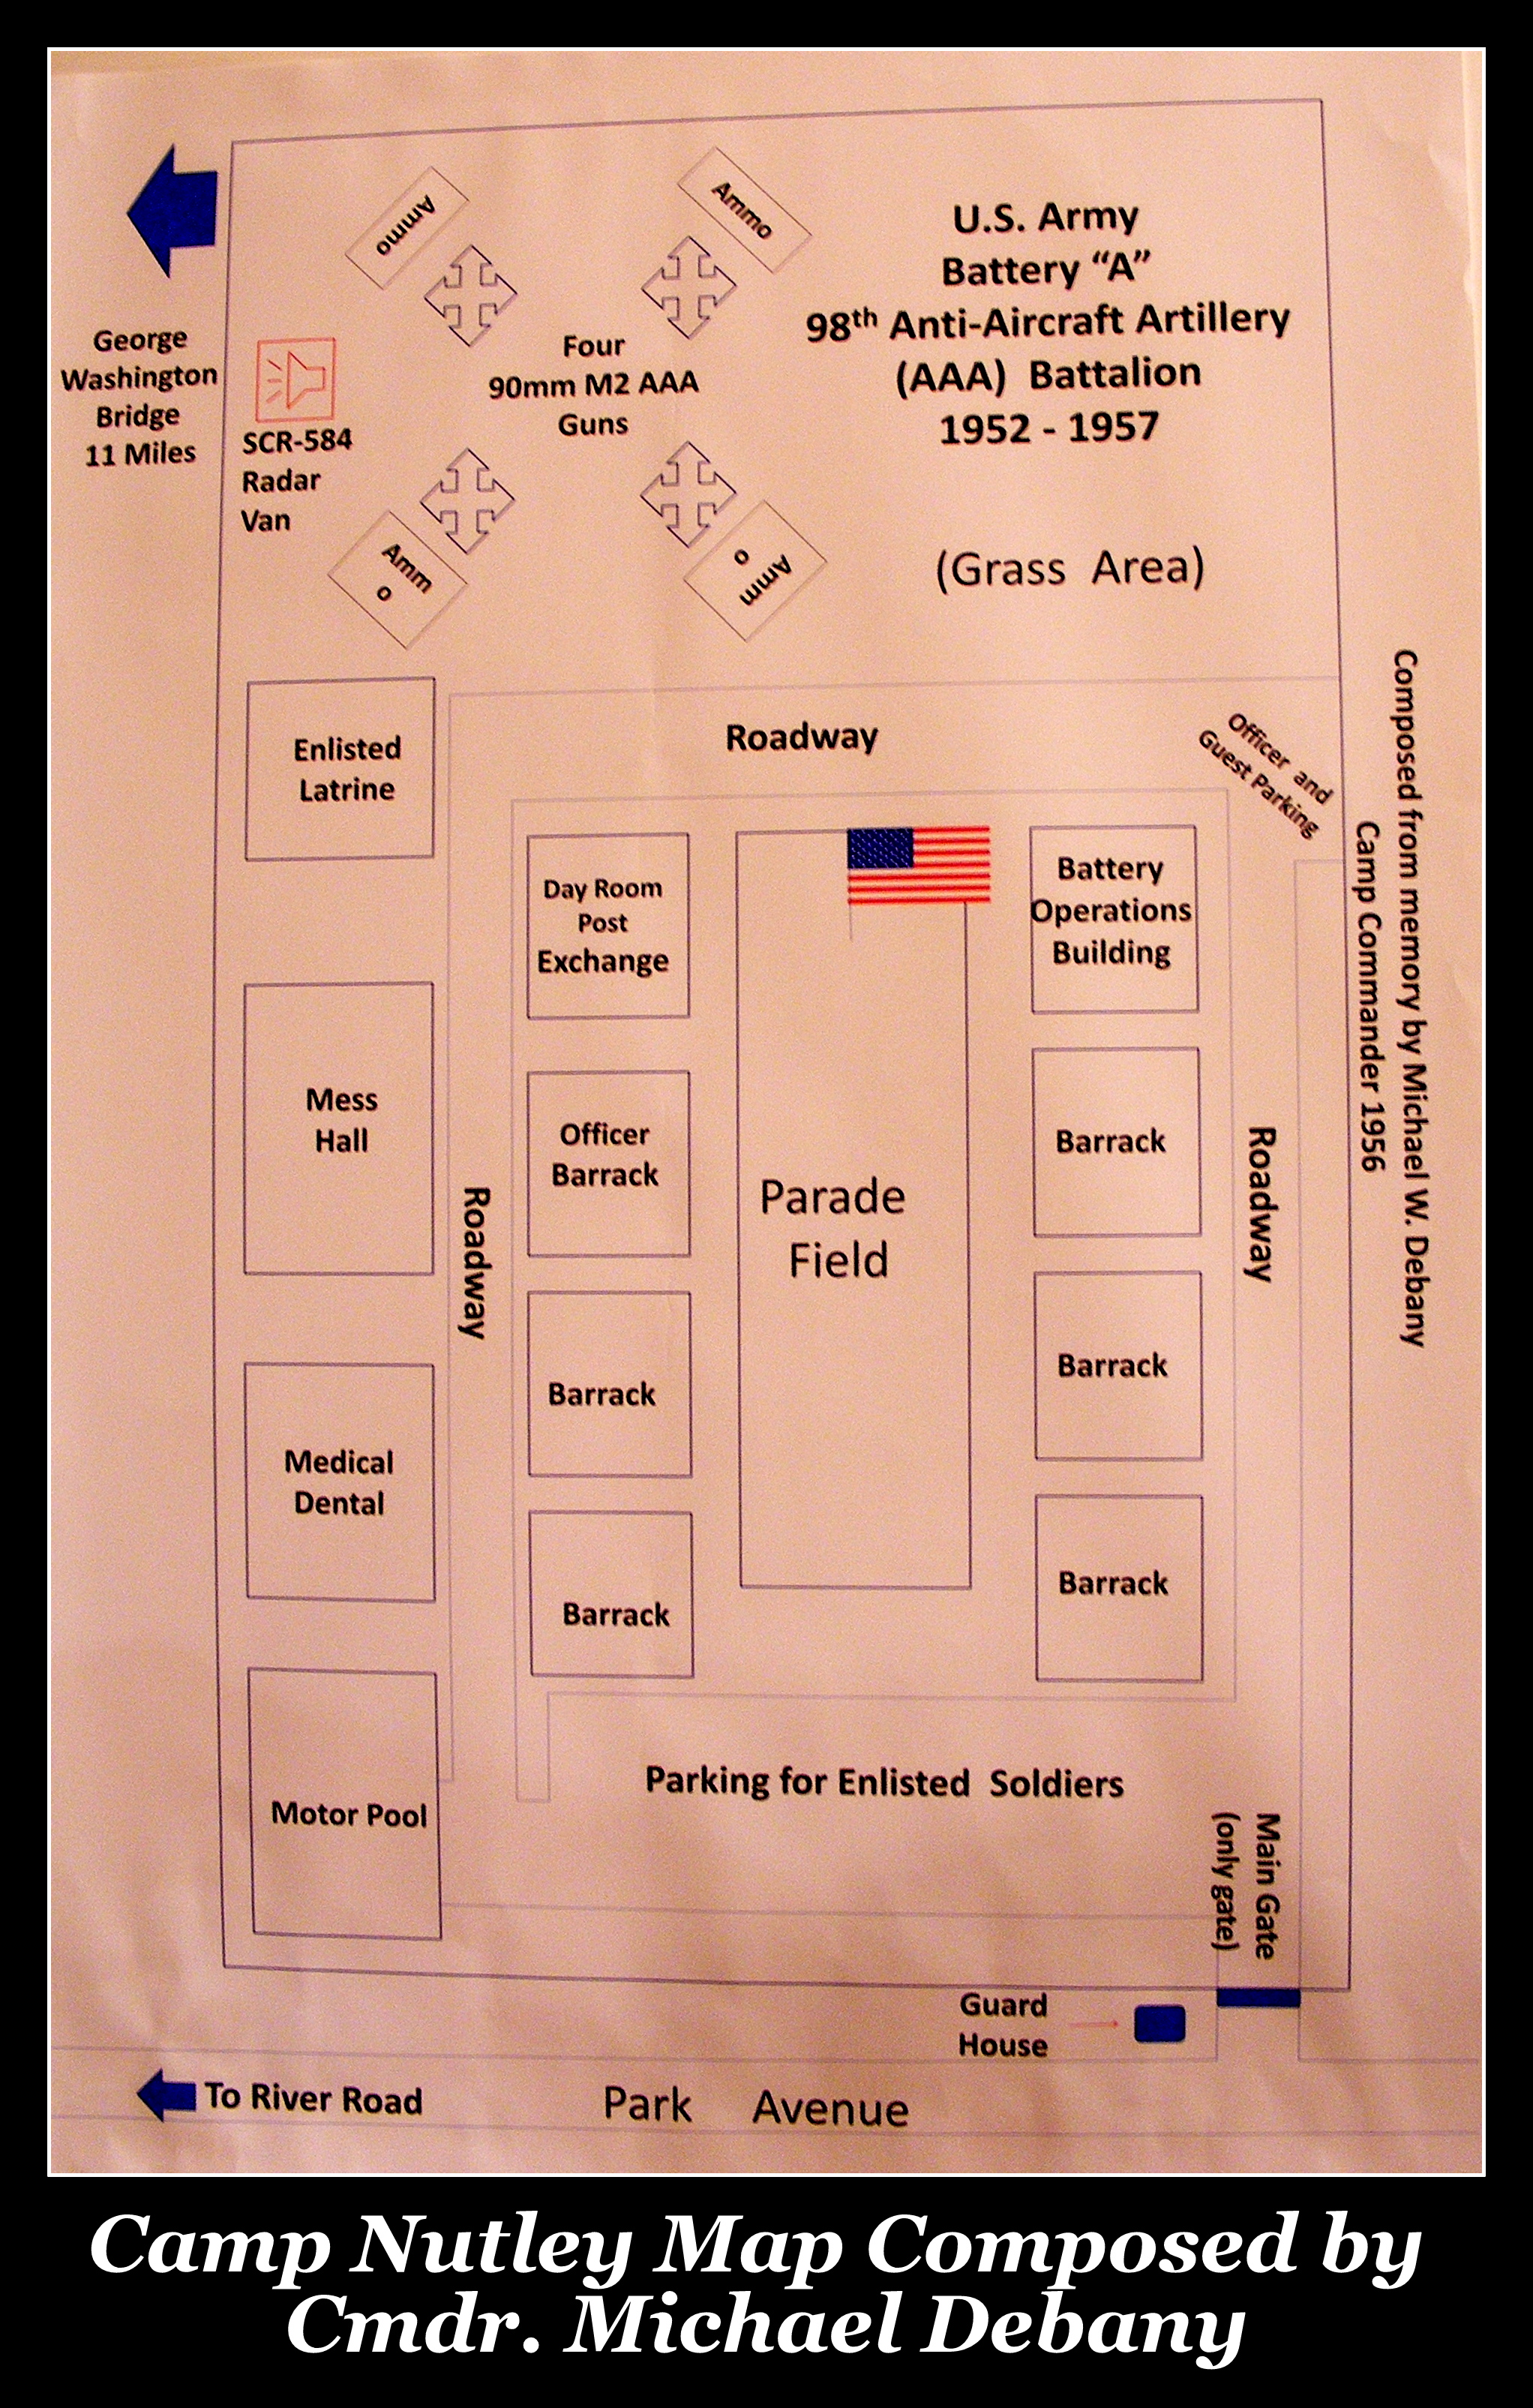 Camp Nutley layout, supplied by former commander Michael W. DeBany